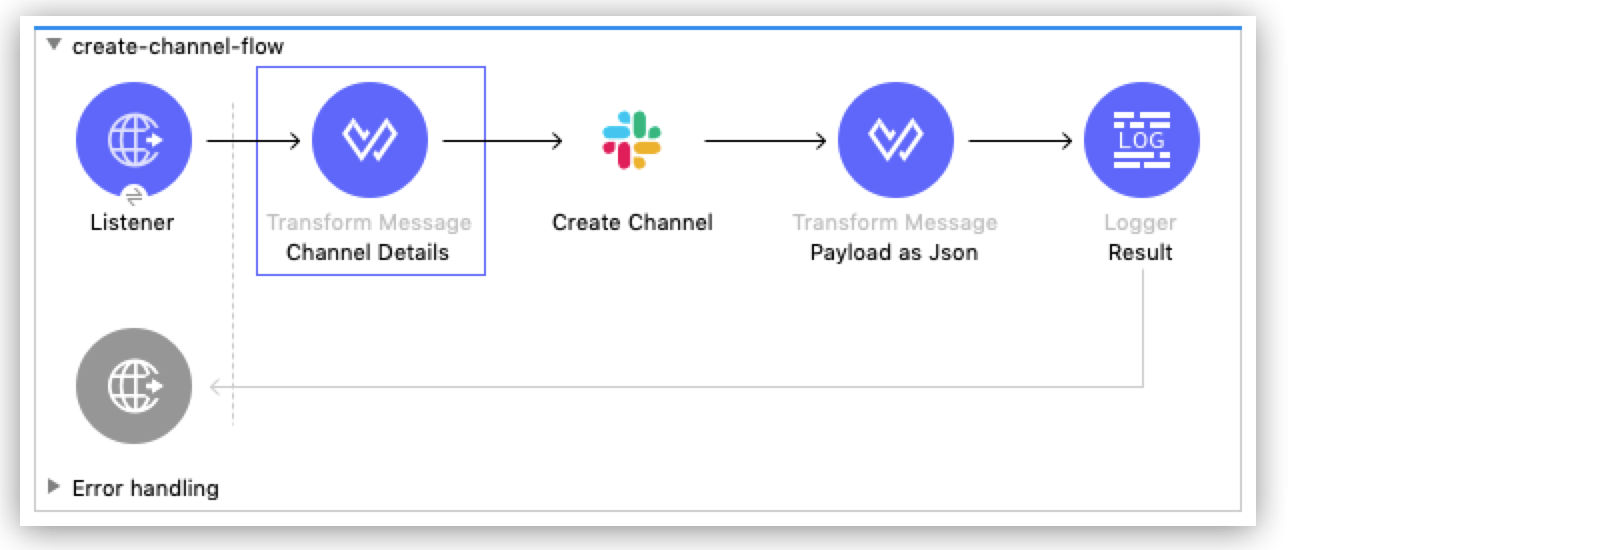 This app flow shows the components used in the Create a Channel example.